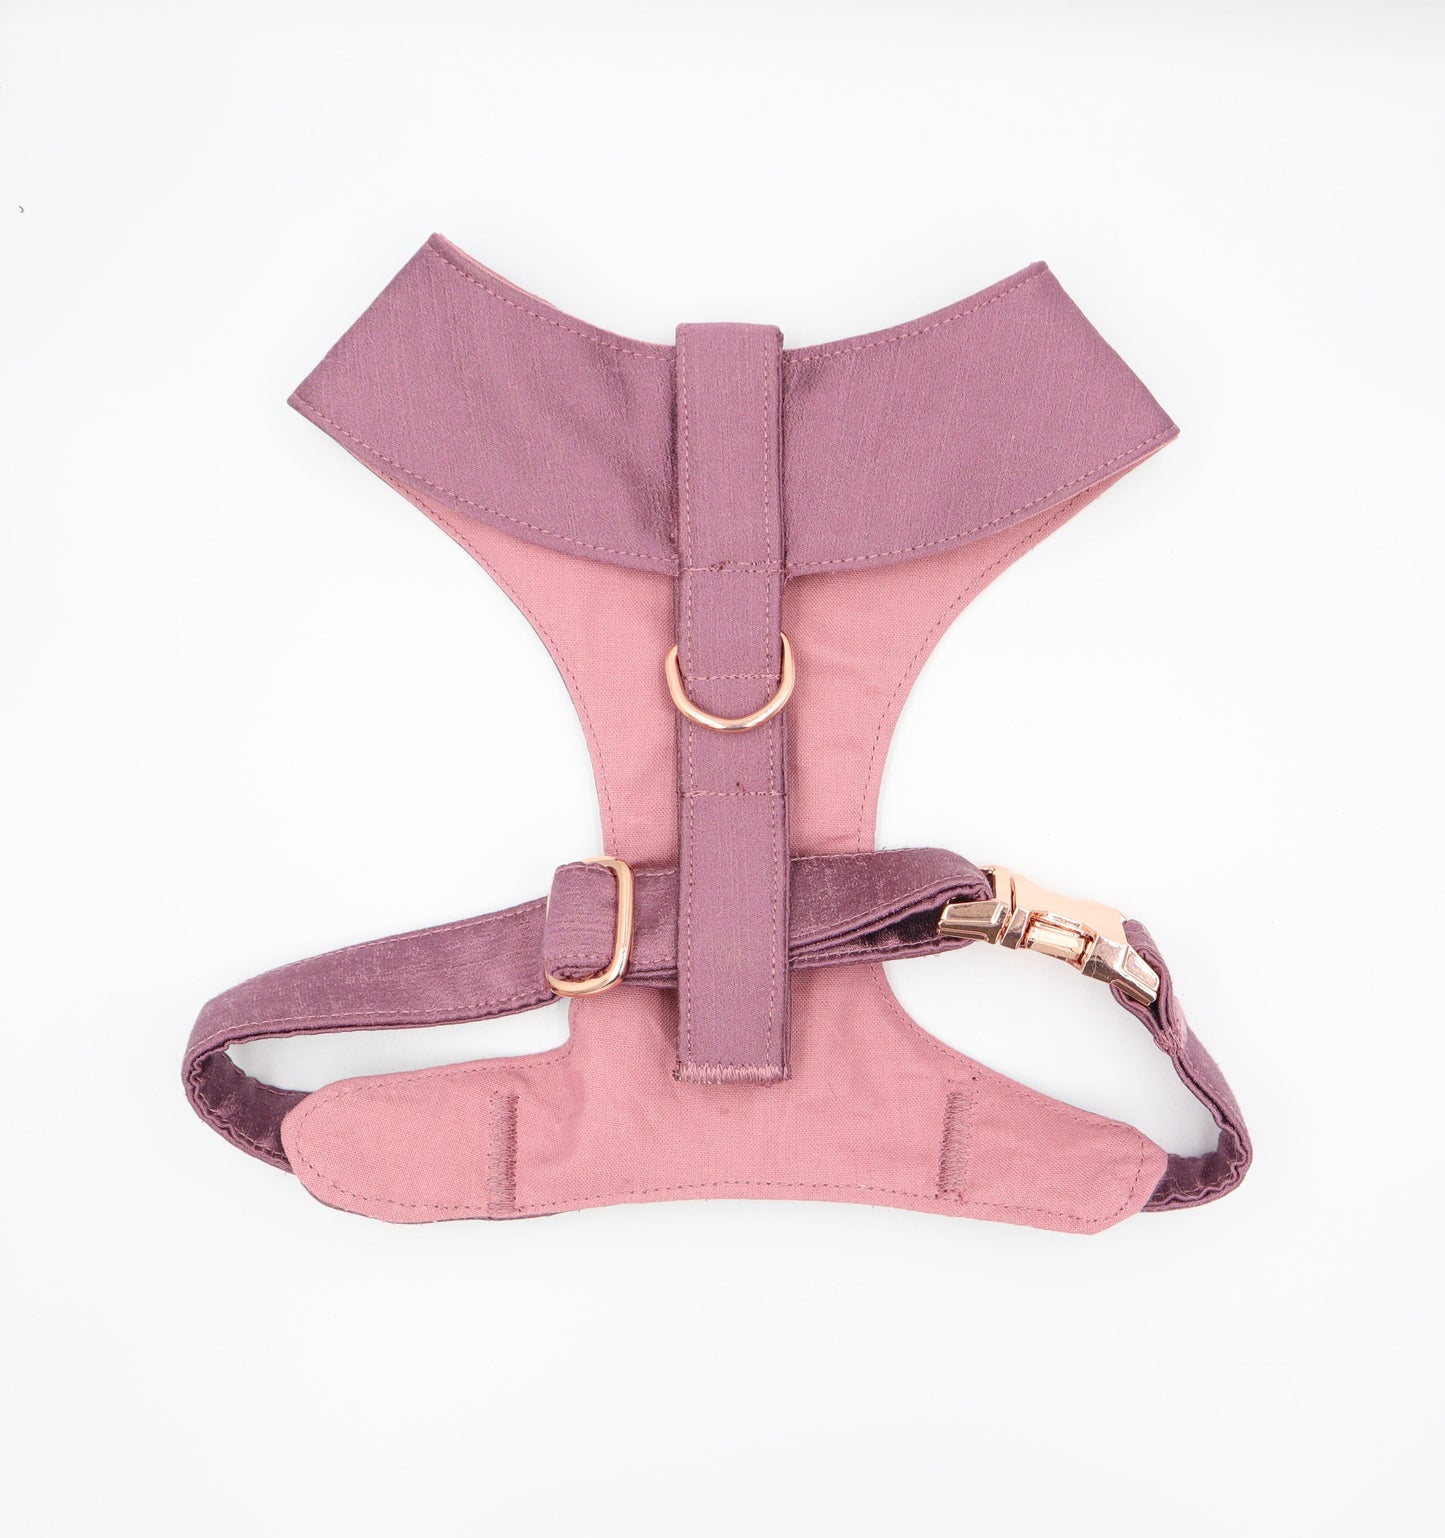 Tuxedo Wedding Dog Harness in Dusty Dusky Pink Shot Silk Satin with Matching Bow CHOICE of COLOURS